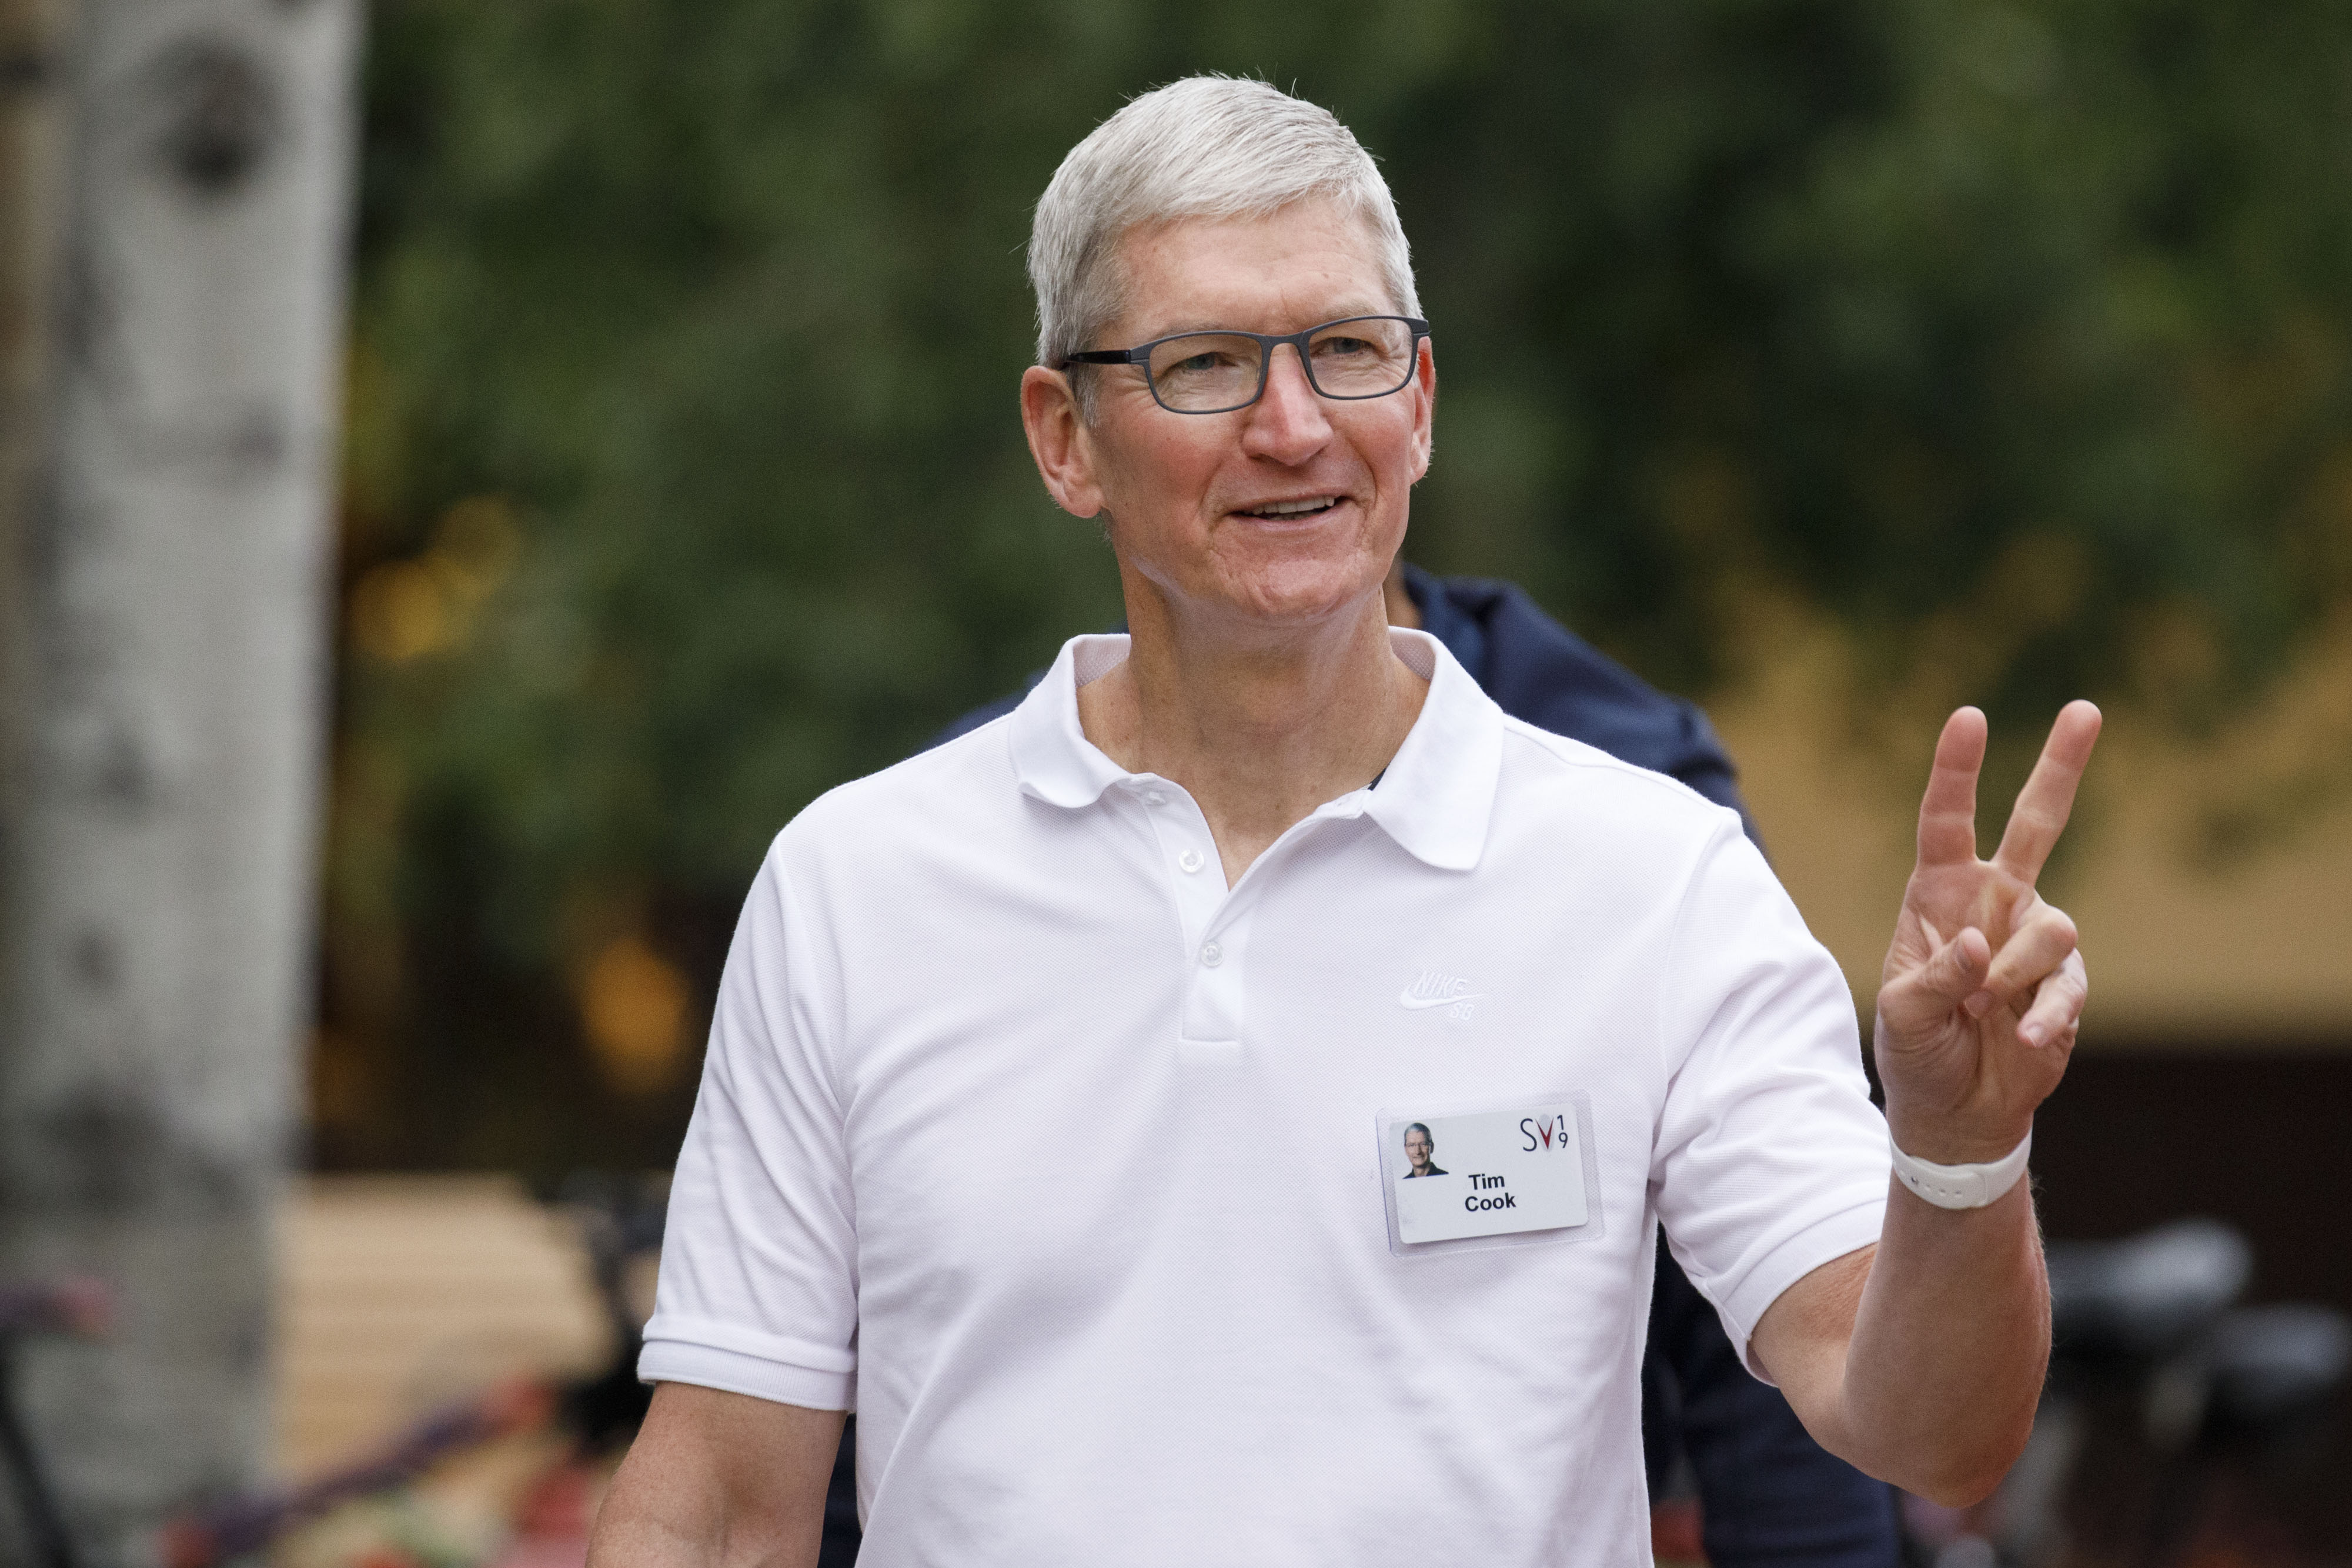 Tim Cook, chief executive officer of Apple Inc., gives a peace sign while arriving for the morning session of the Allen &amp; Co. Media and Technology Conference in Sun Valley, Idaho&nbsp;on July 10, 2019.